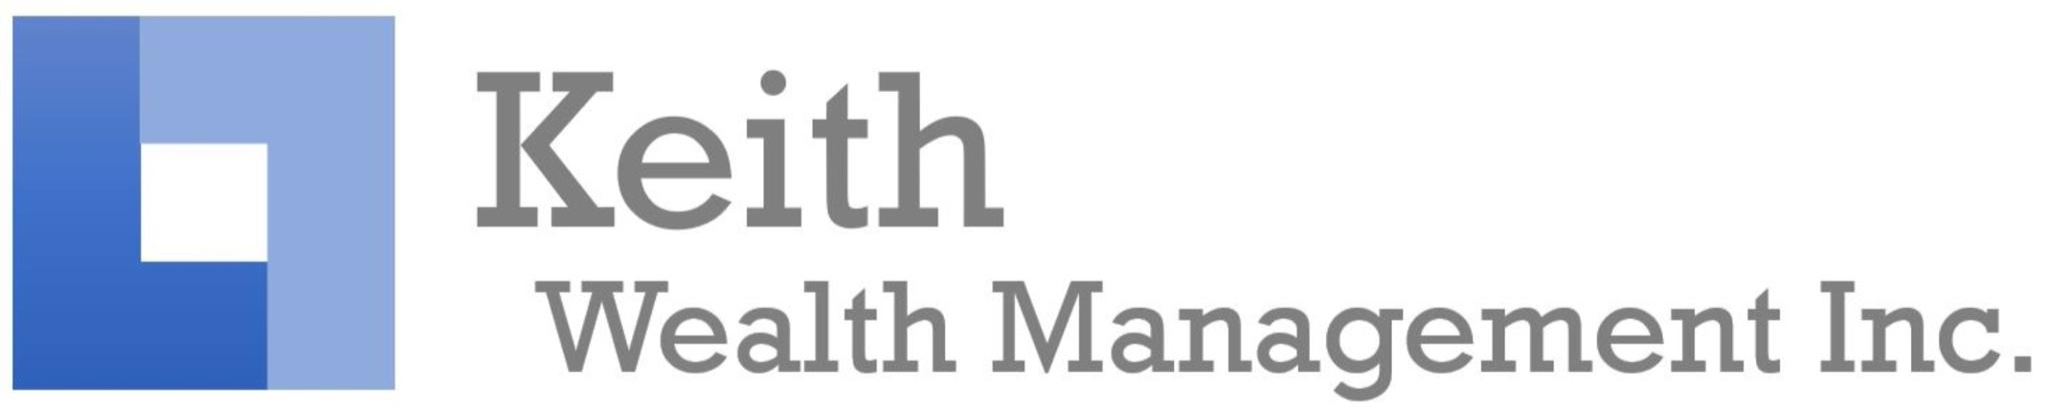 Keith Wealth Management Inc.